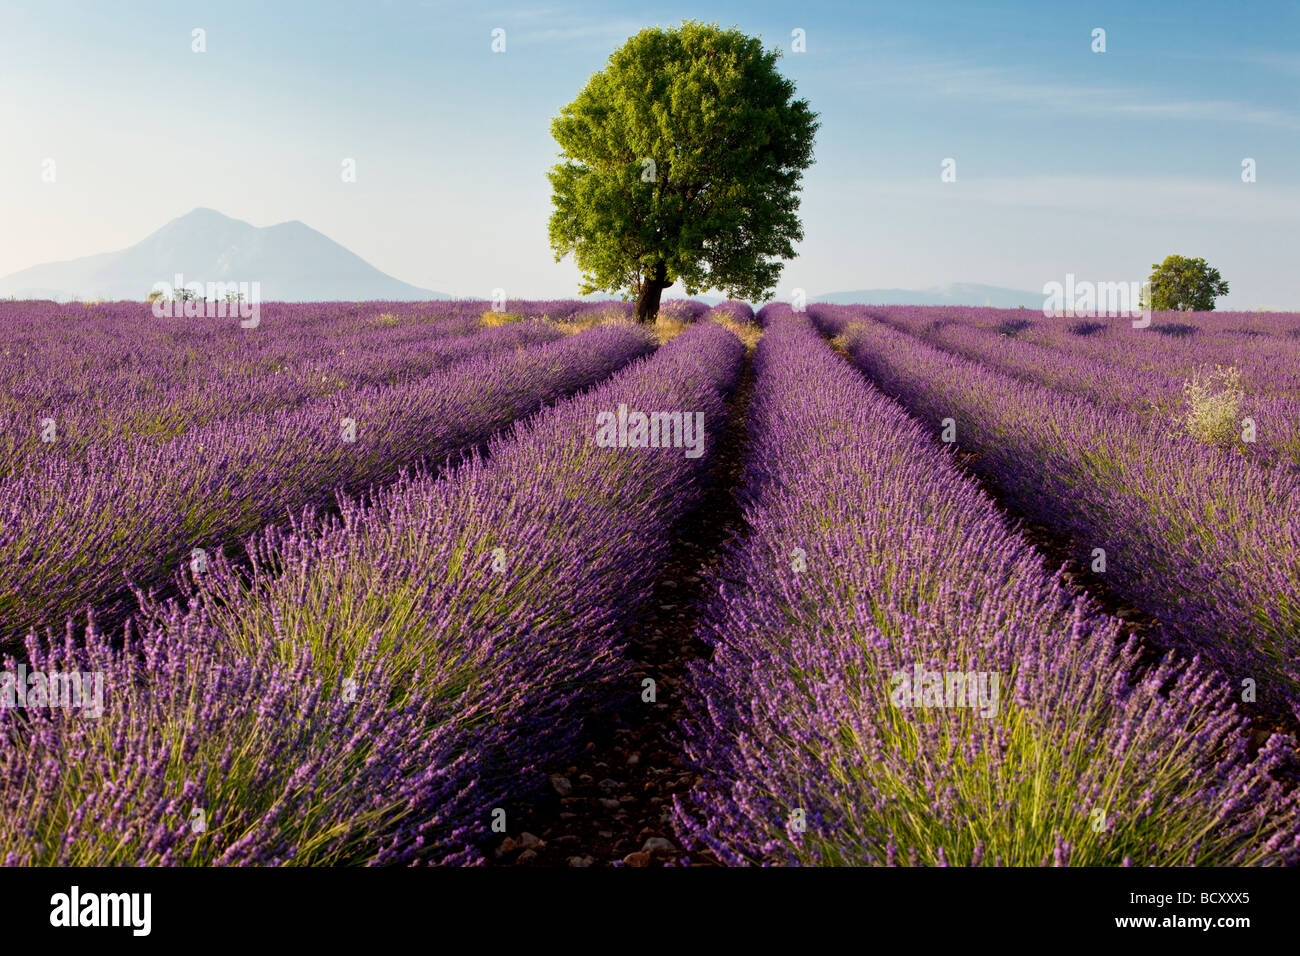 Lavender Tree High Resolution Stock Photography and Images - Alamy